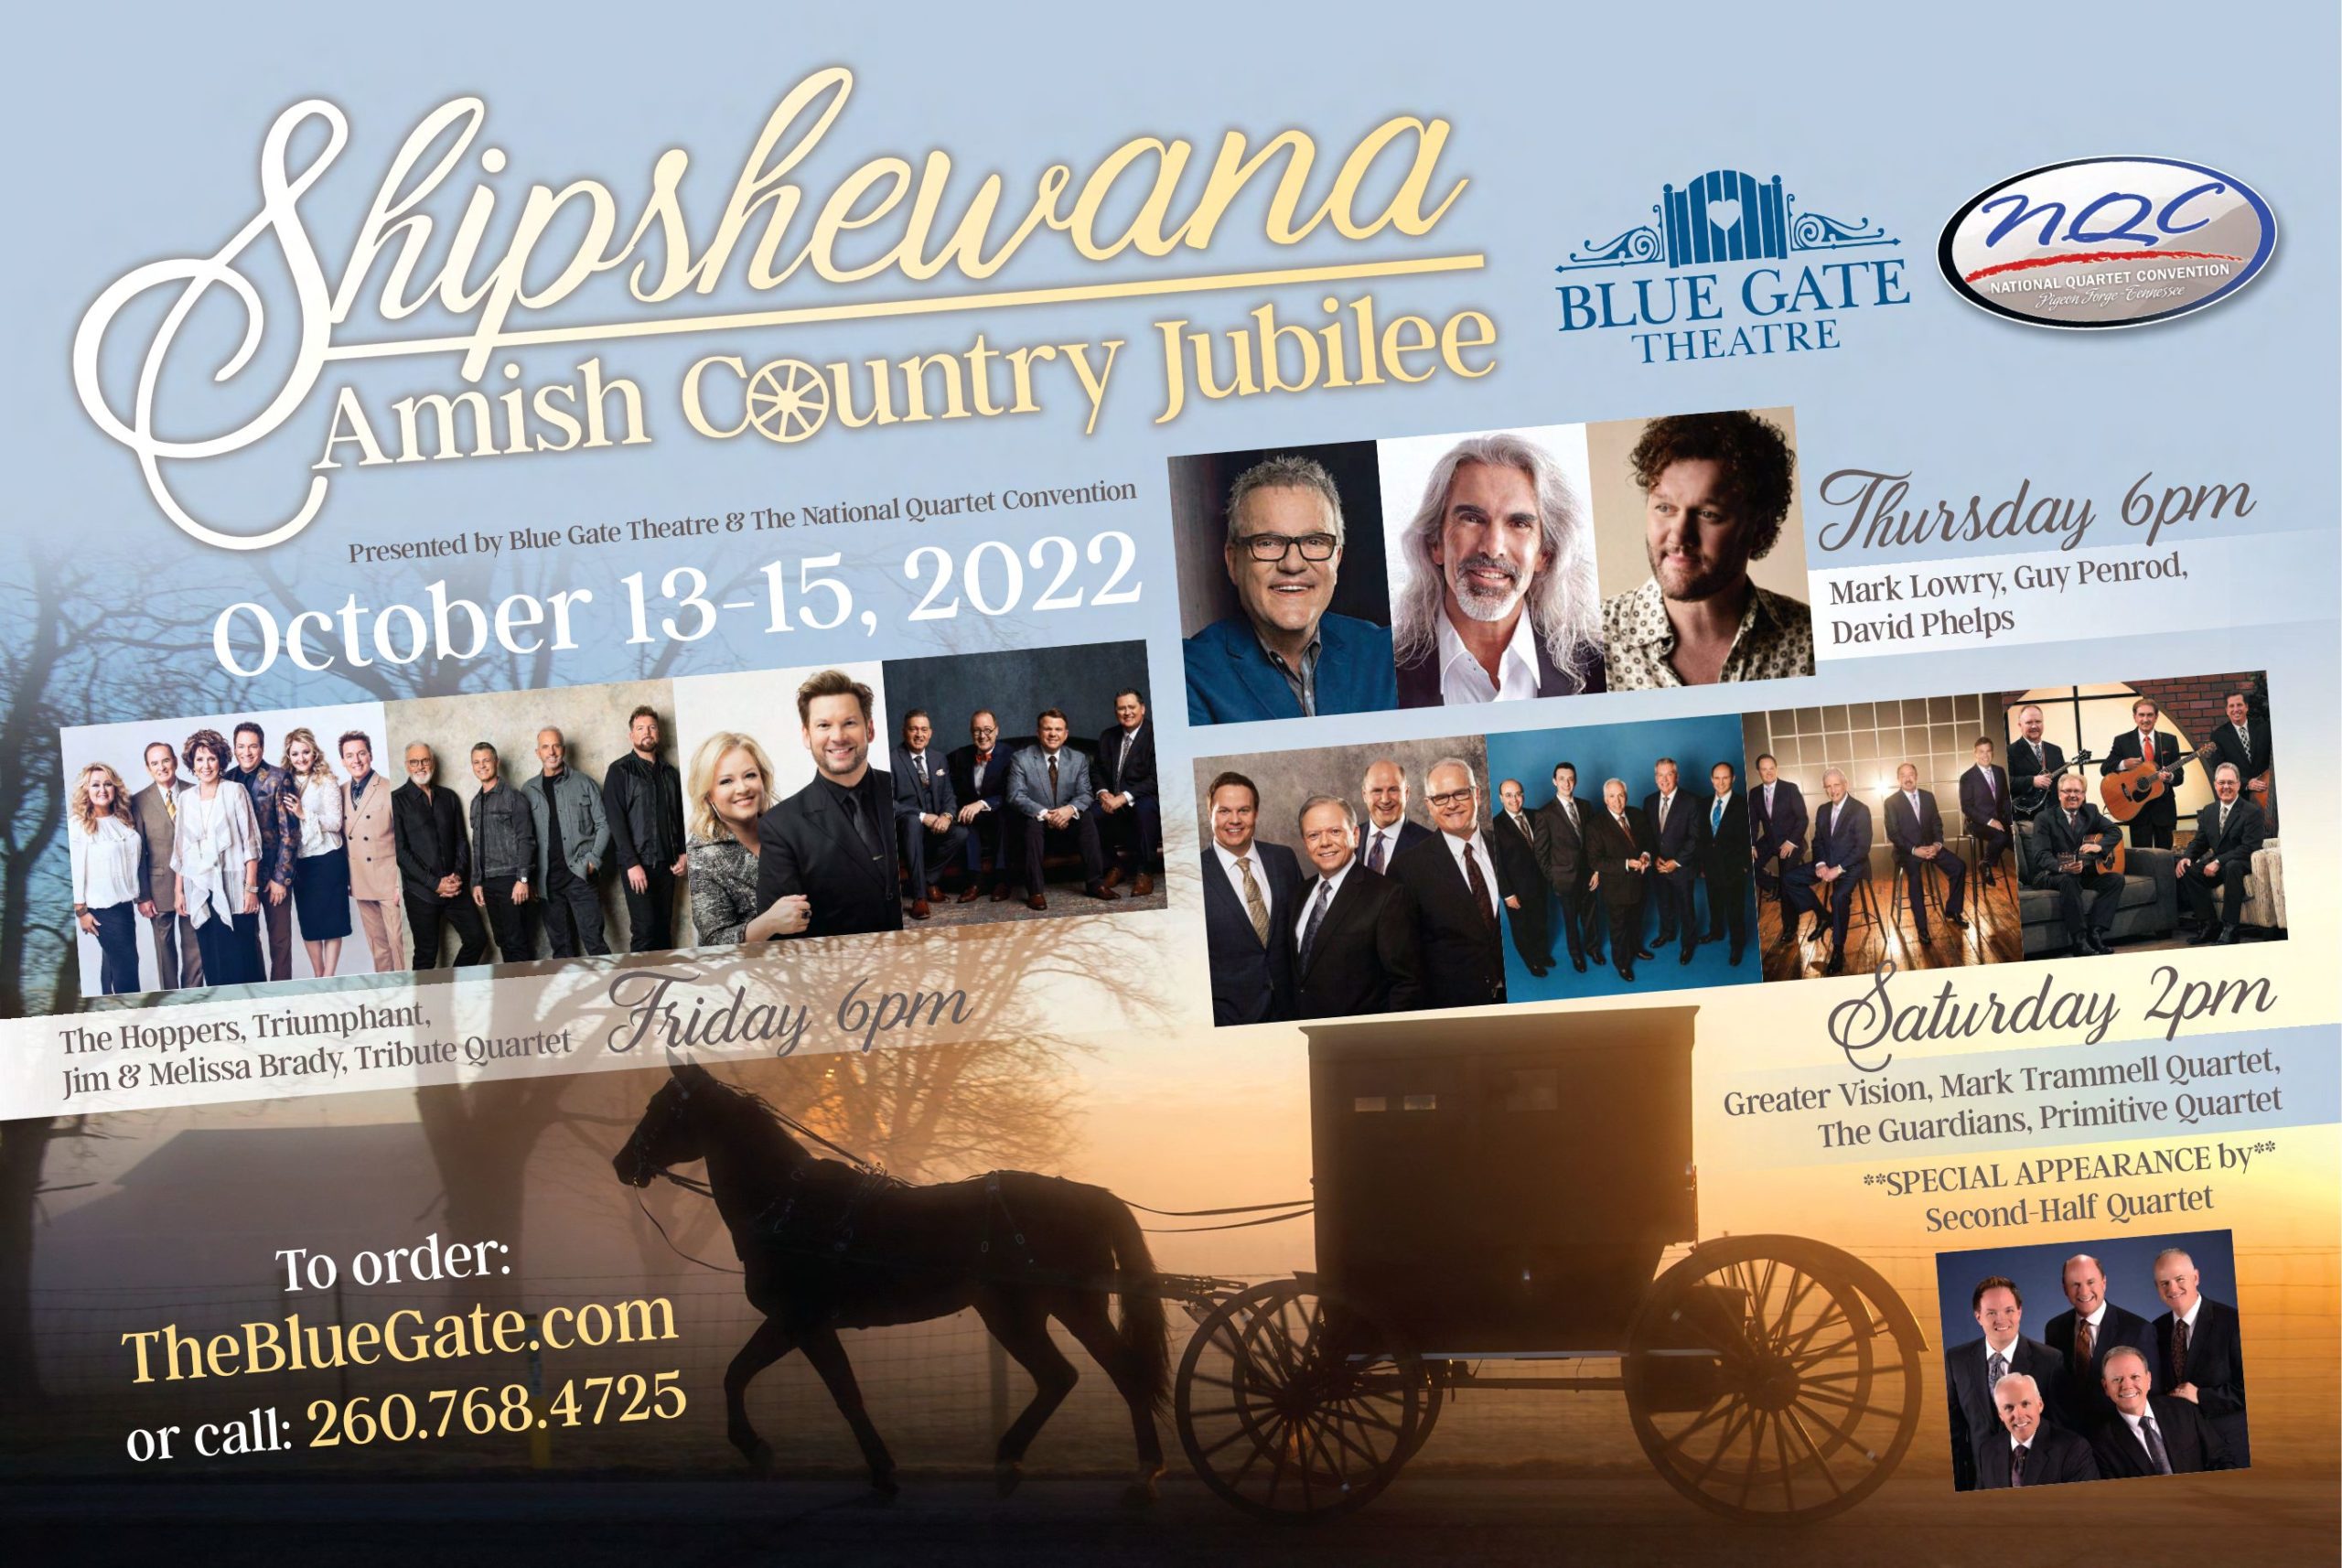 NQC Announces New Event, Shipshewana Amish Country Jubilee, in